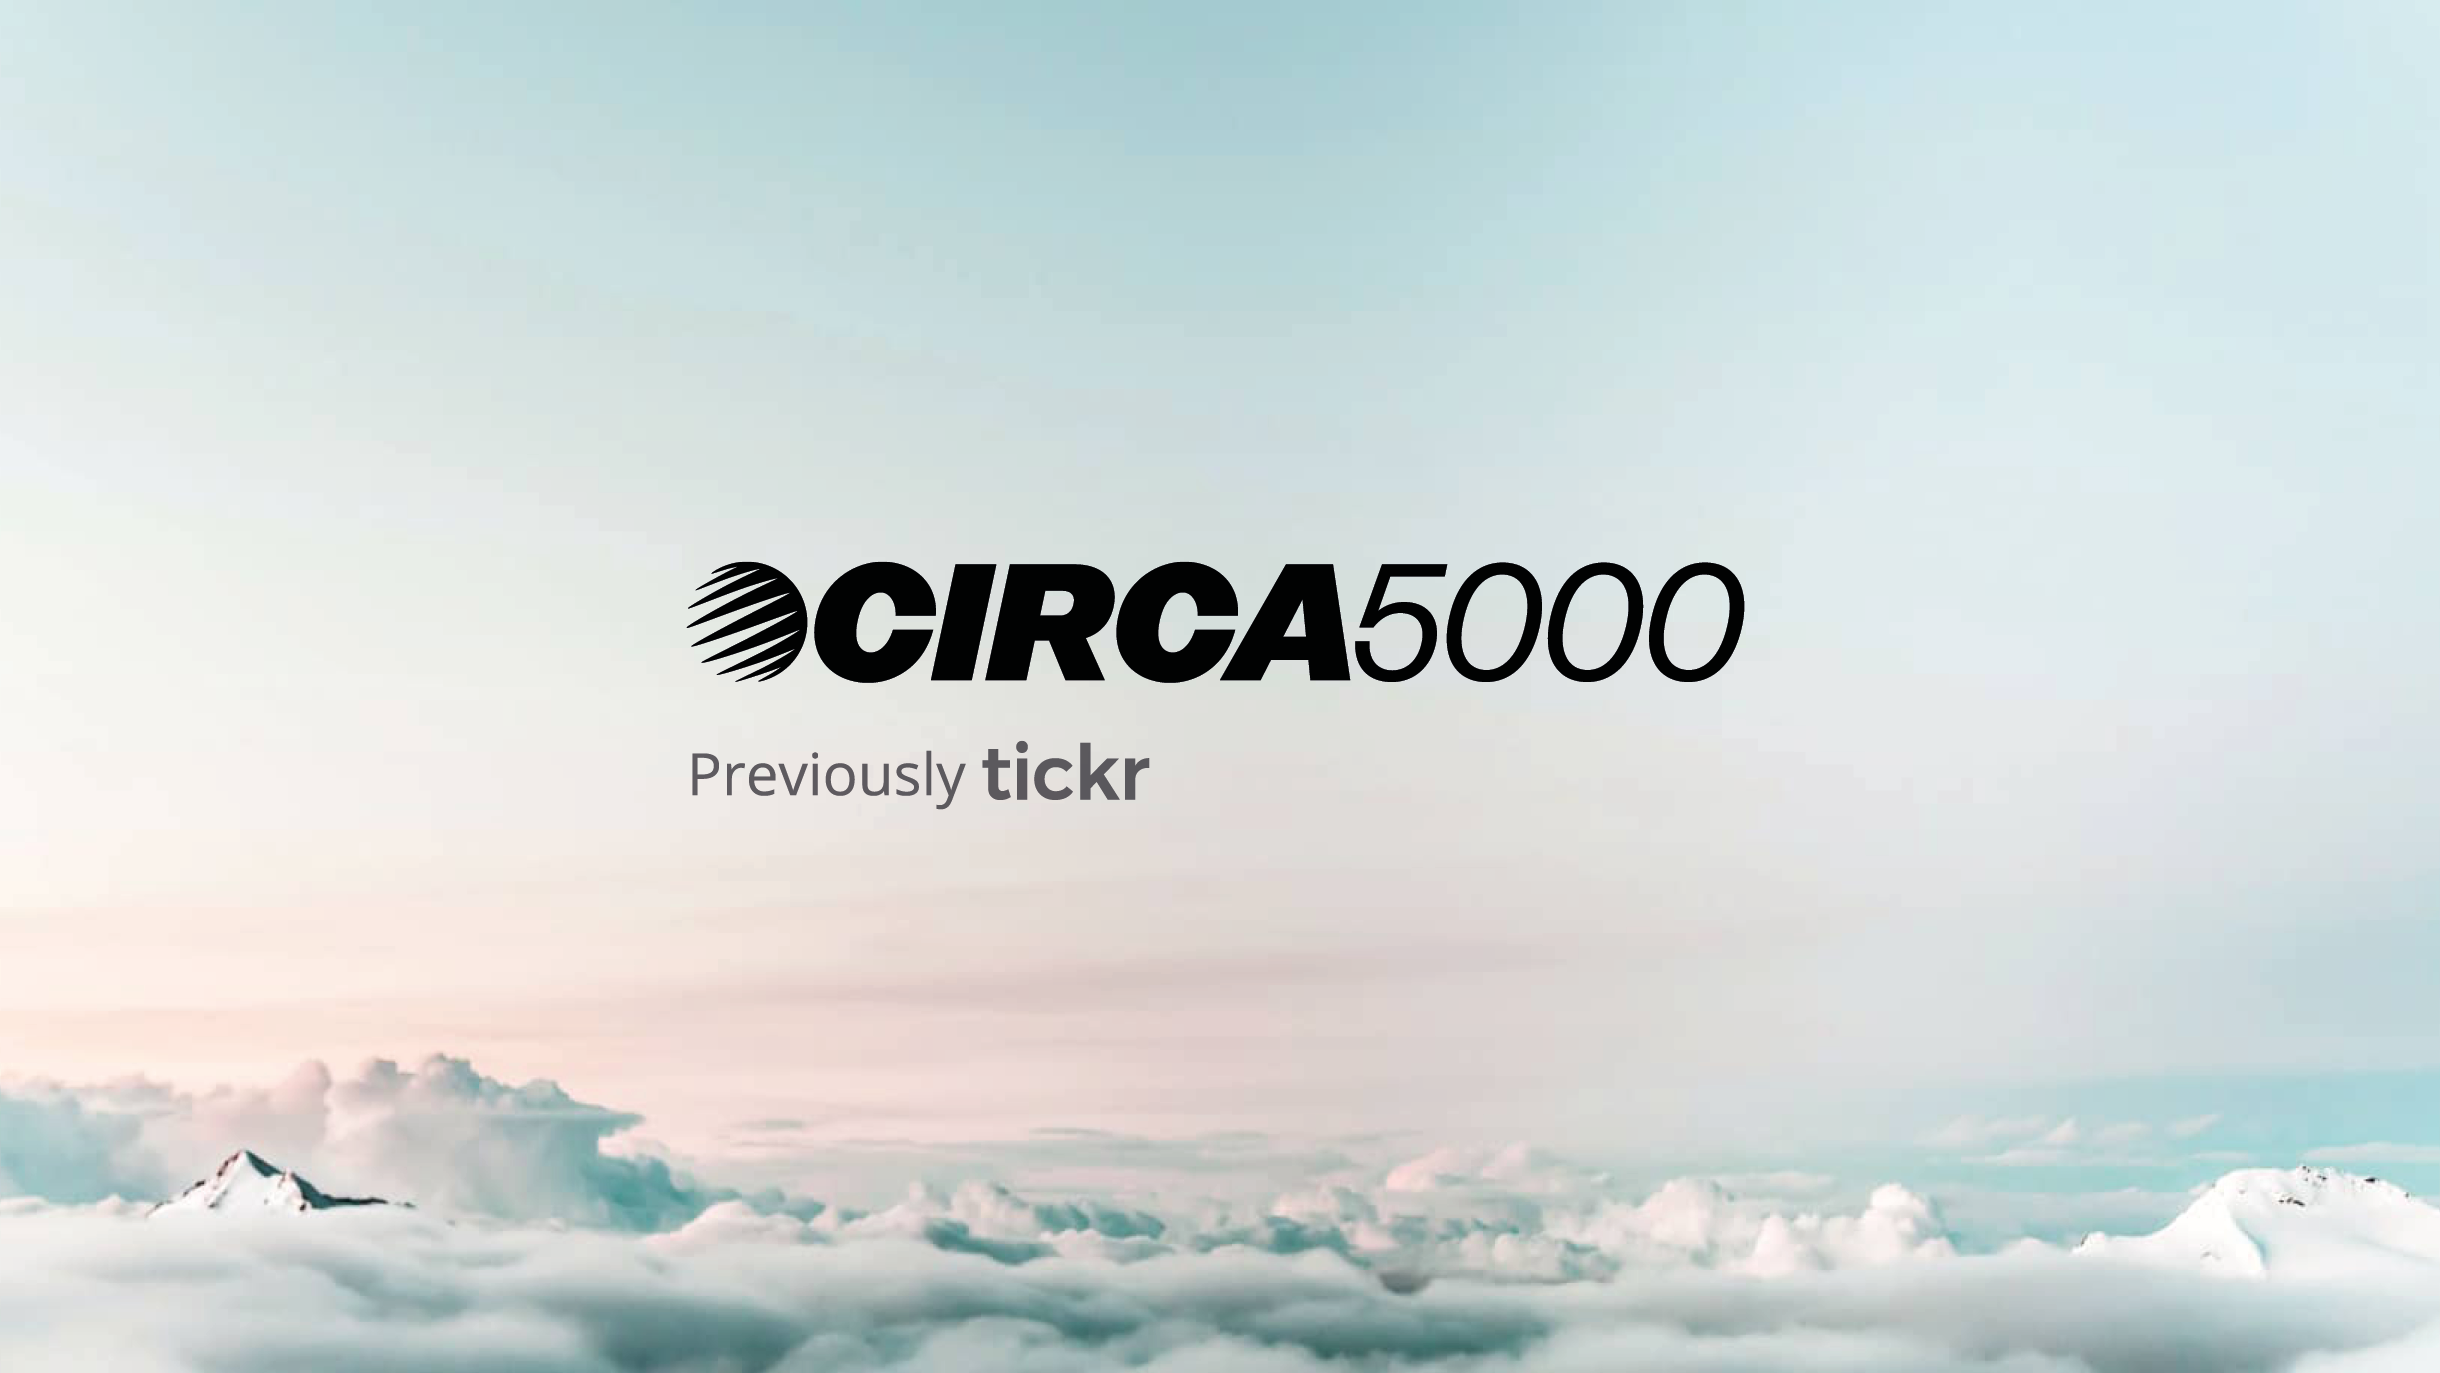 Introducing CIRCA5000: the ethical investment platform enriching our infrastructure